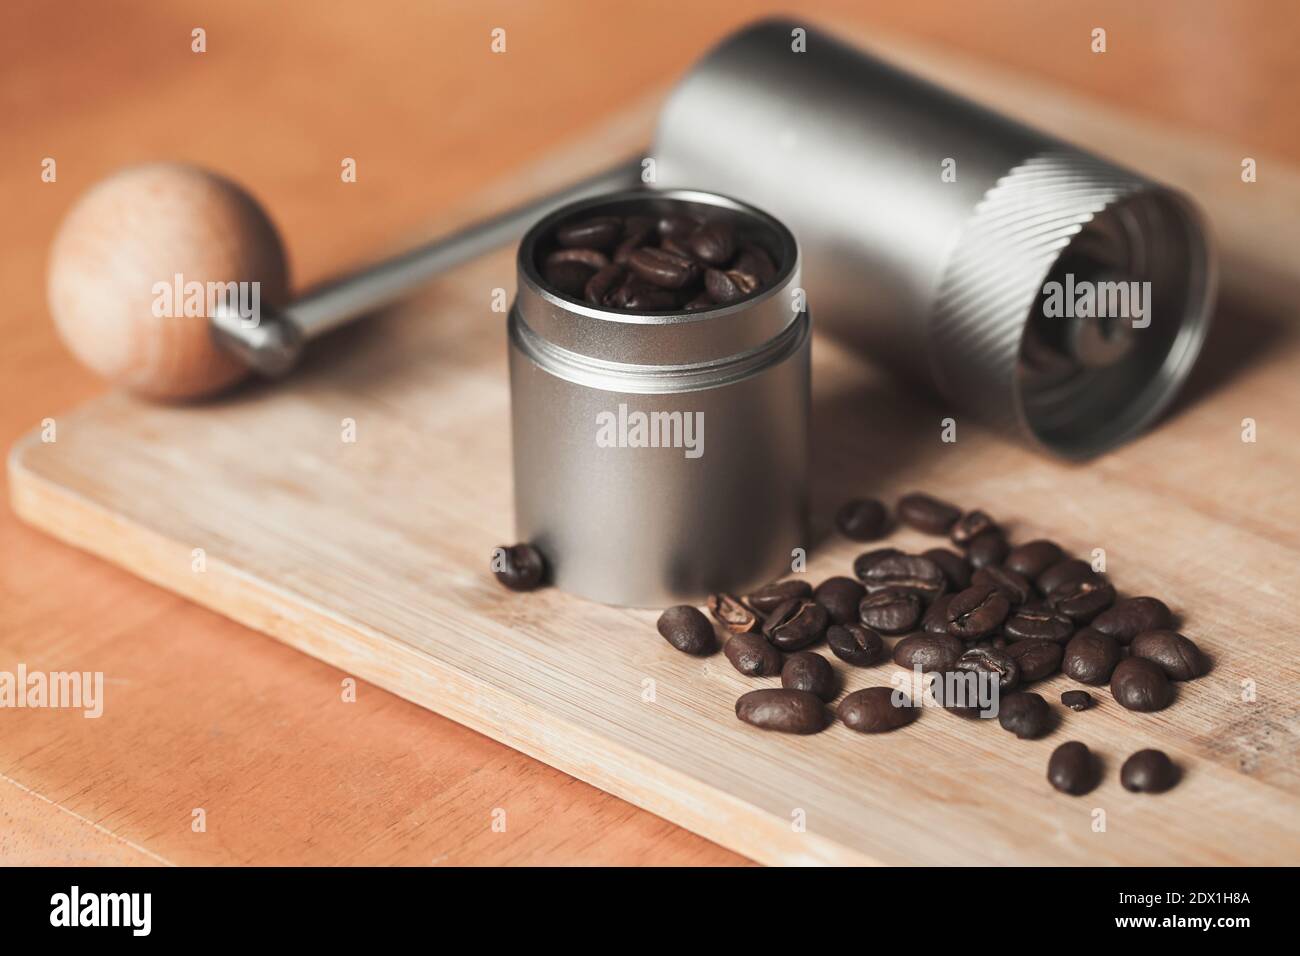 Manual coffee grinder and dark roasted coffee beans are on wooden desk, close-up photo with selective soft focus Stock Photo